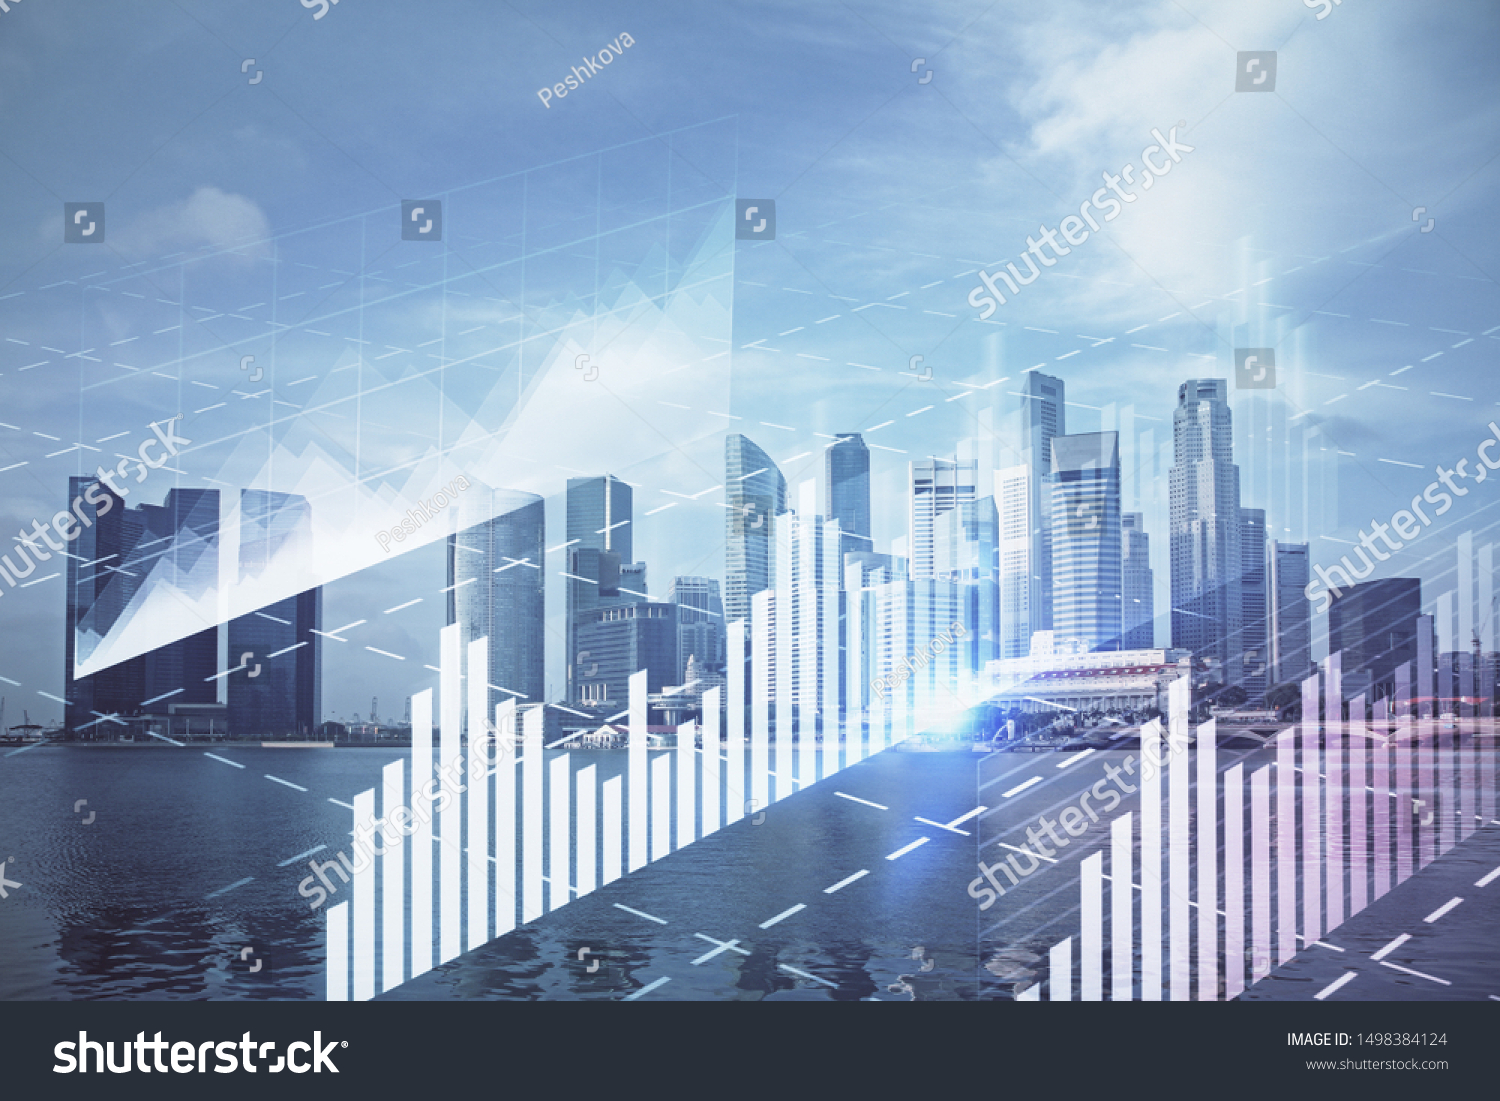 Forex chart on cityscape with tall buildings background multi exposure. Financial research concept. #1498384124